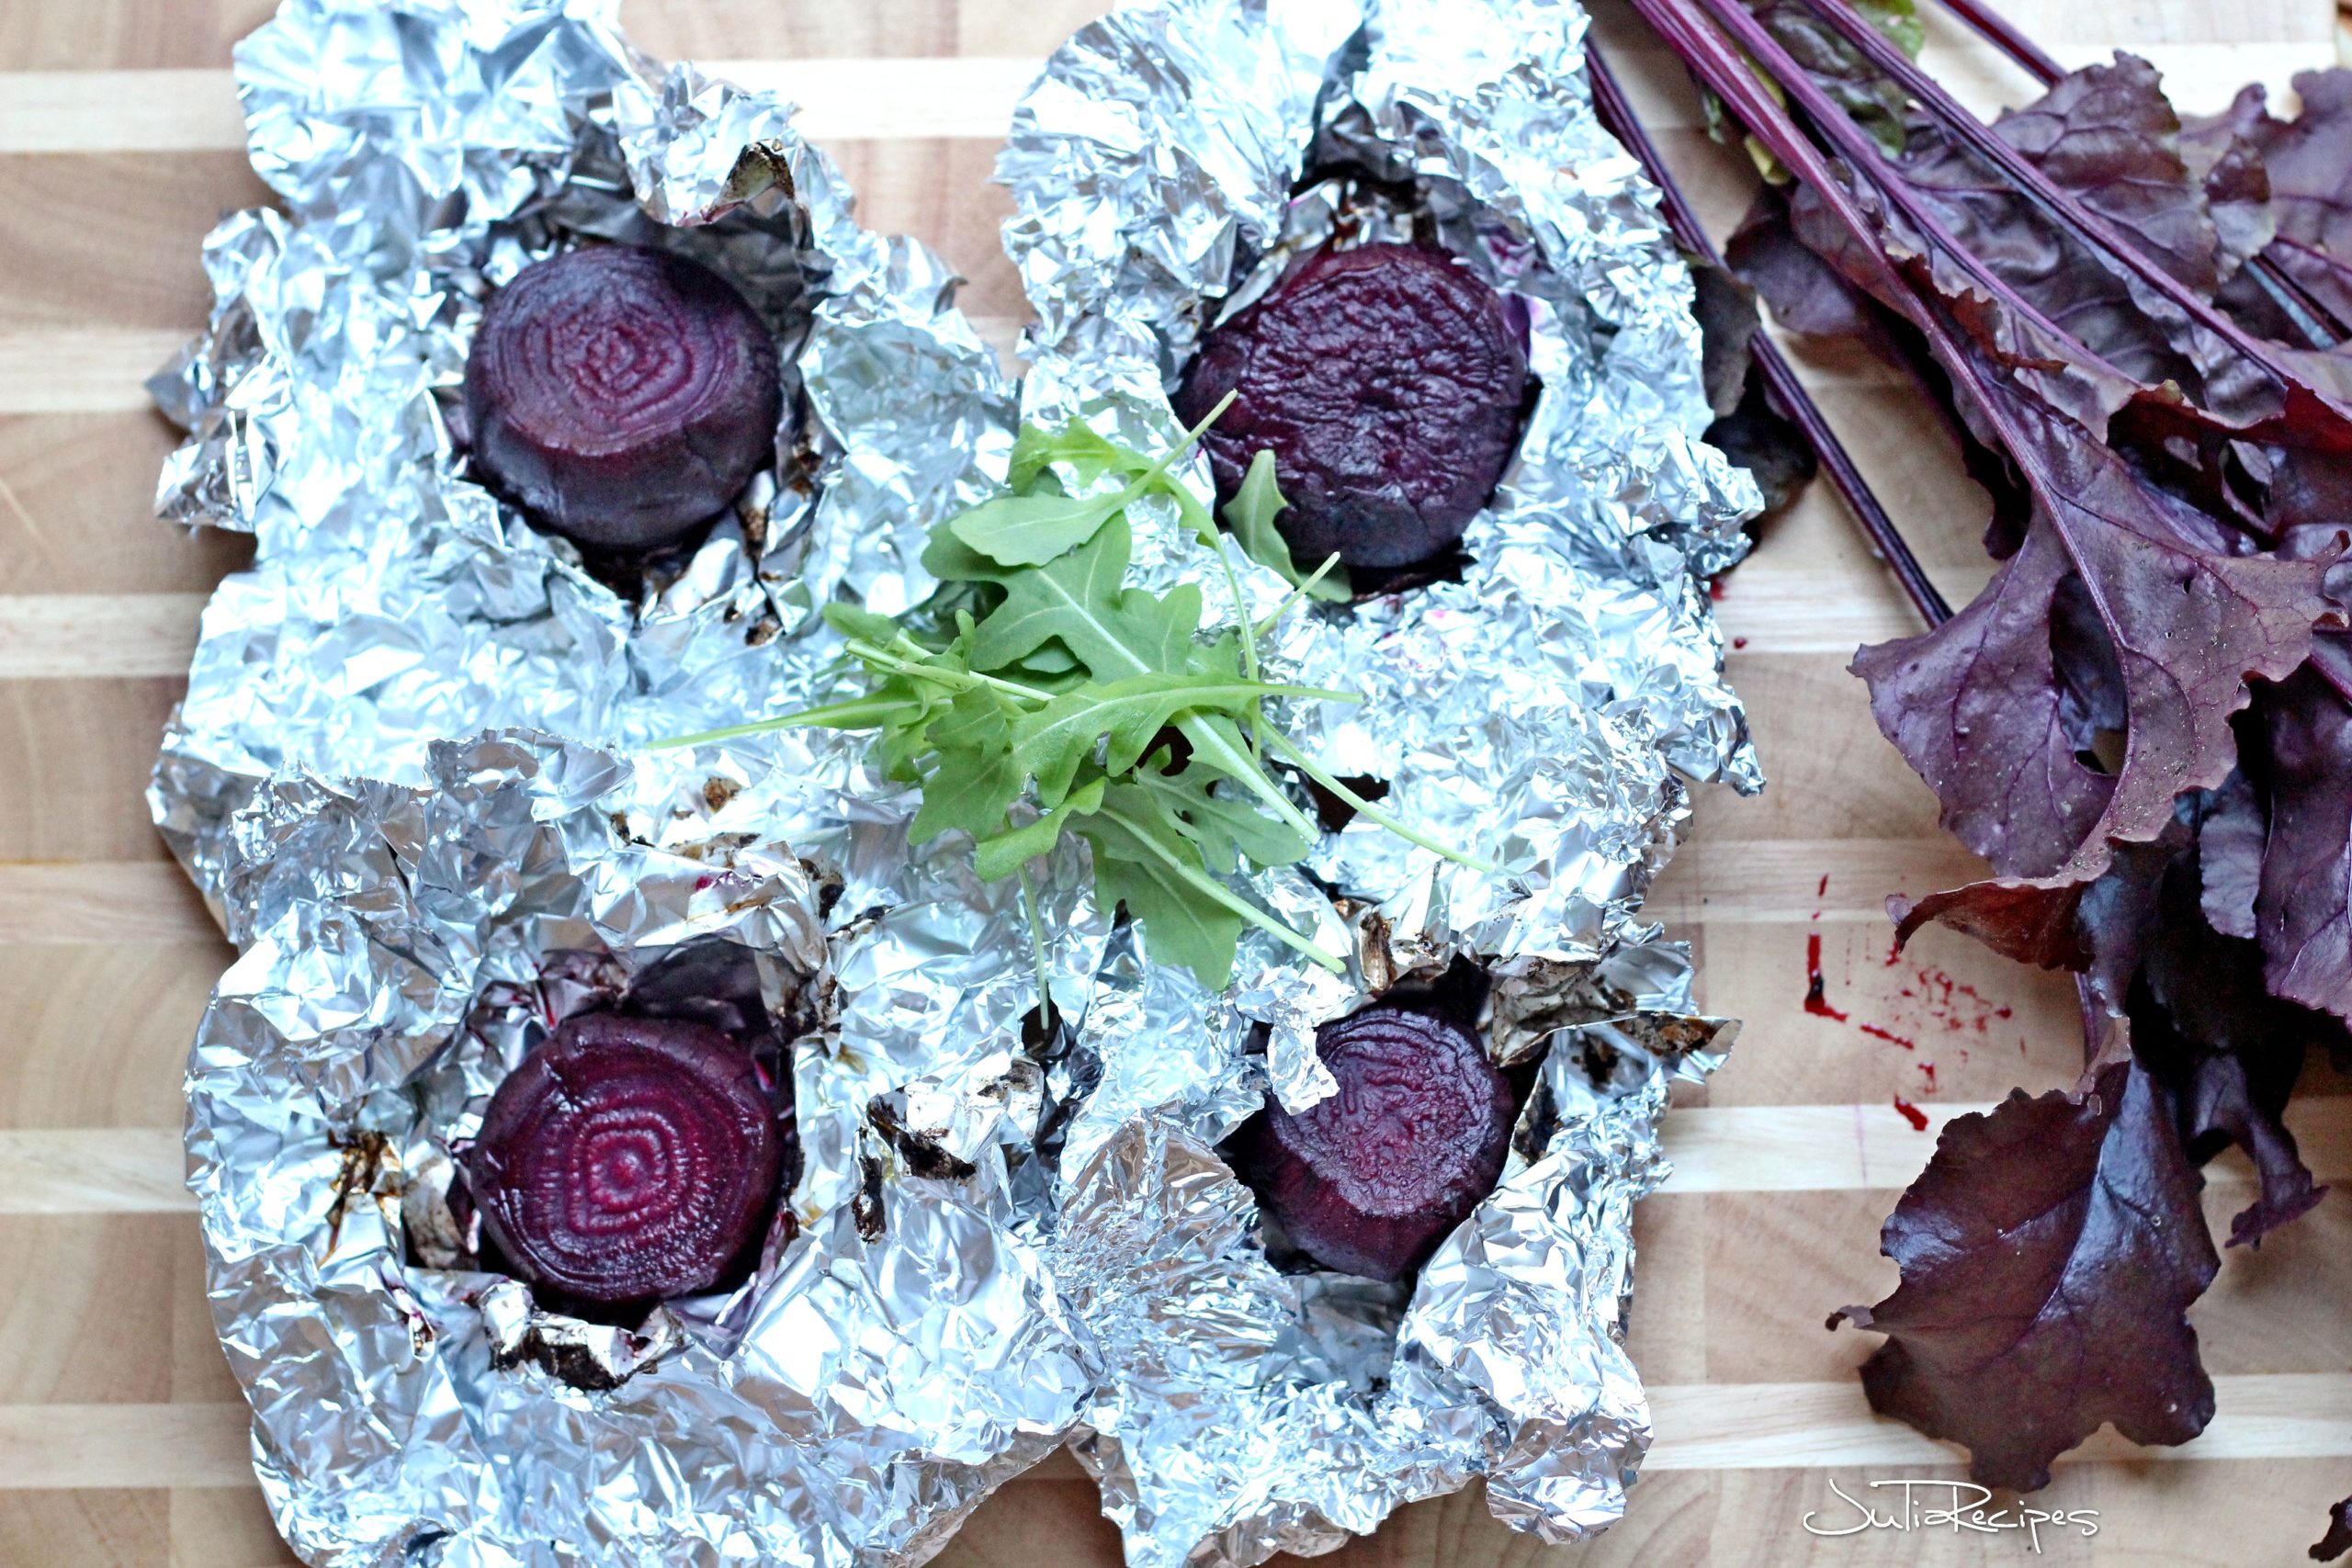 Roasted beets in aluminum foil